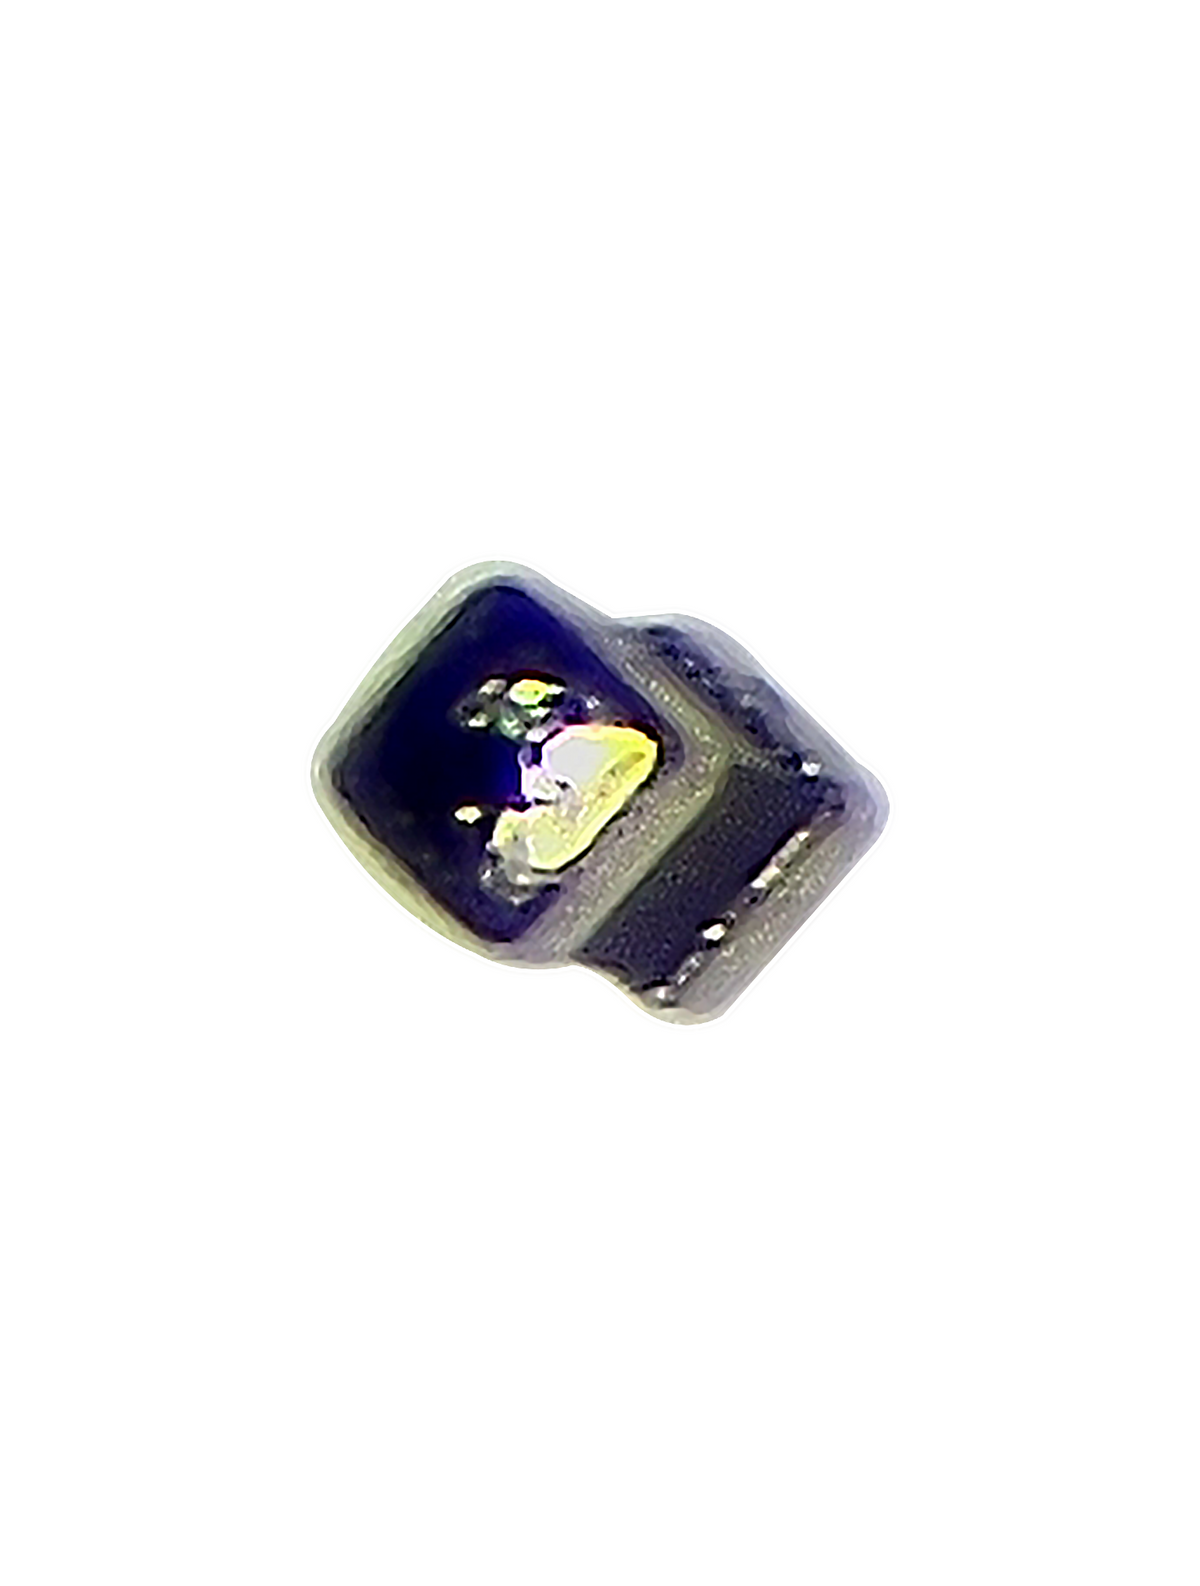 CAPACITOR COMPATIBLE WITH IPHONE SE (C2411)